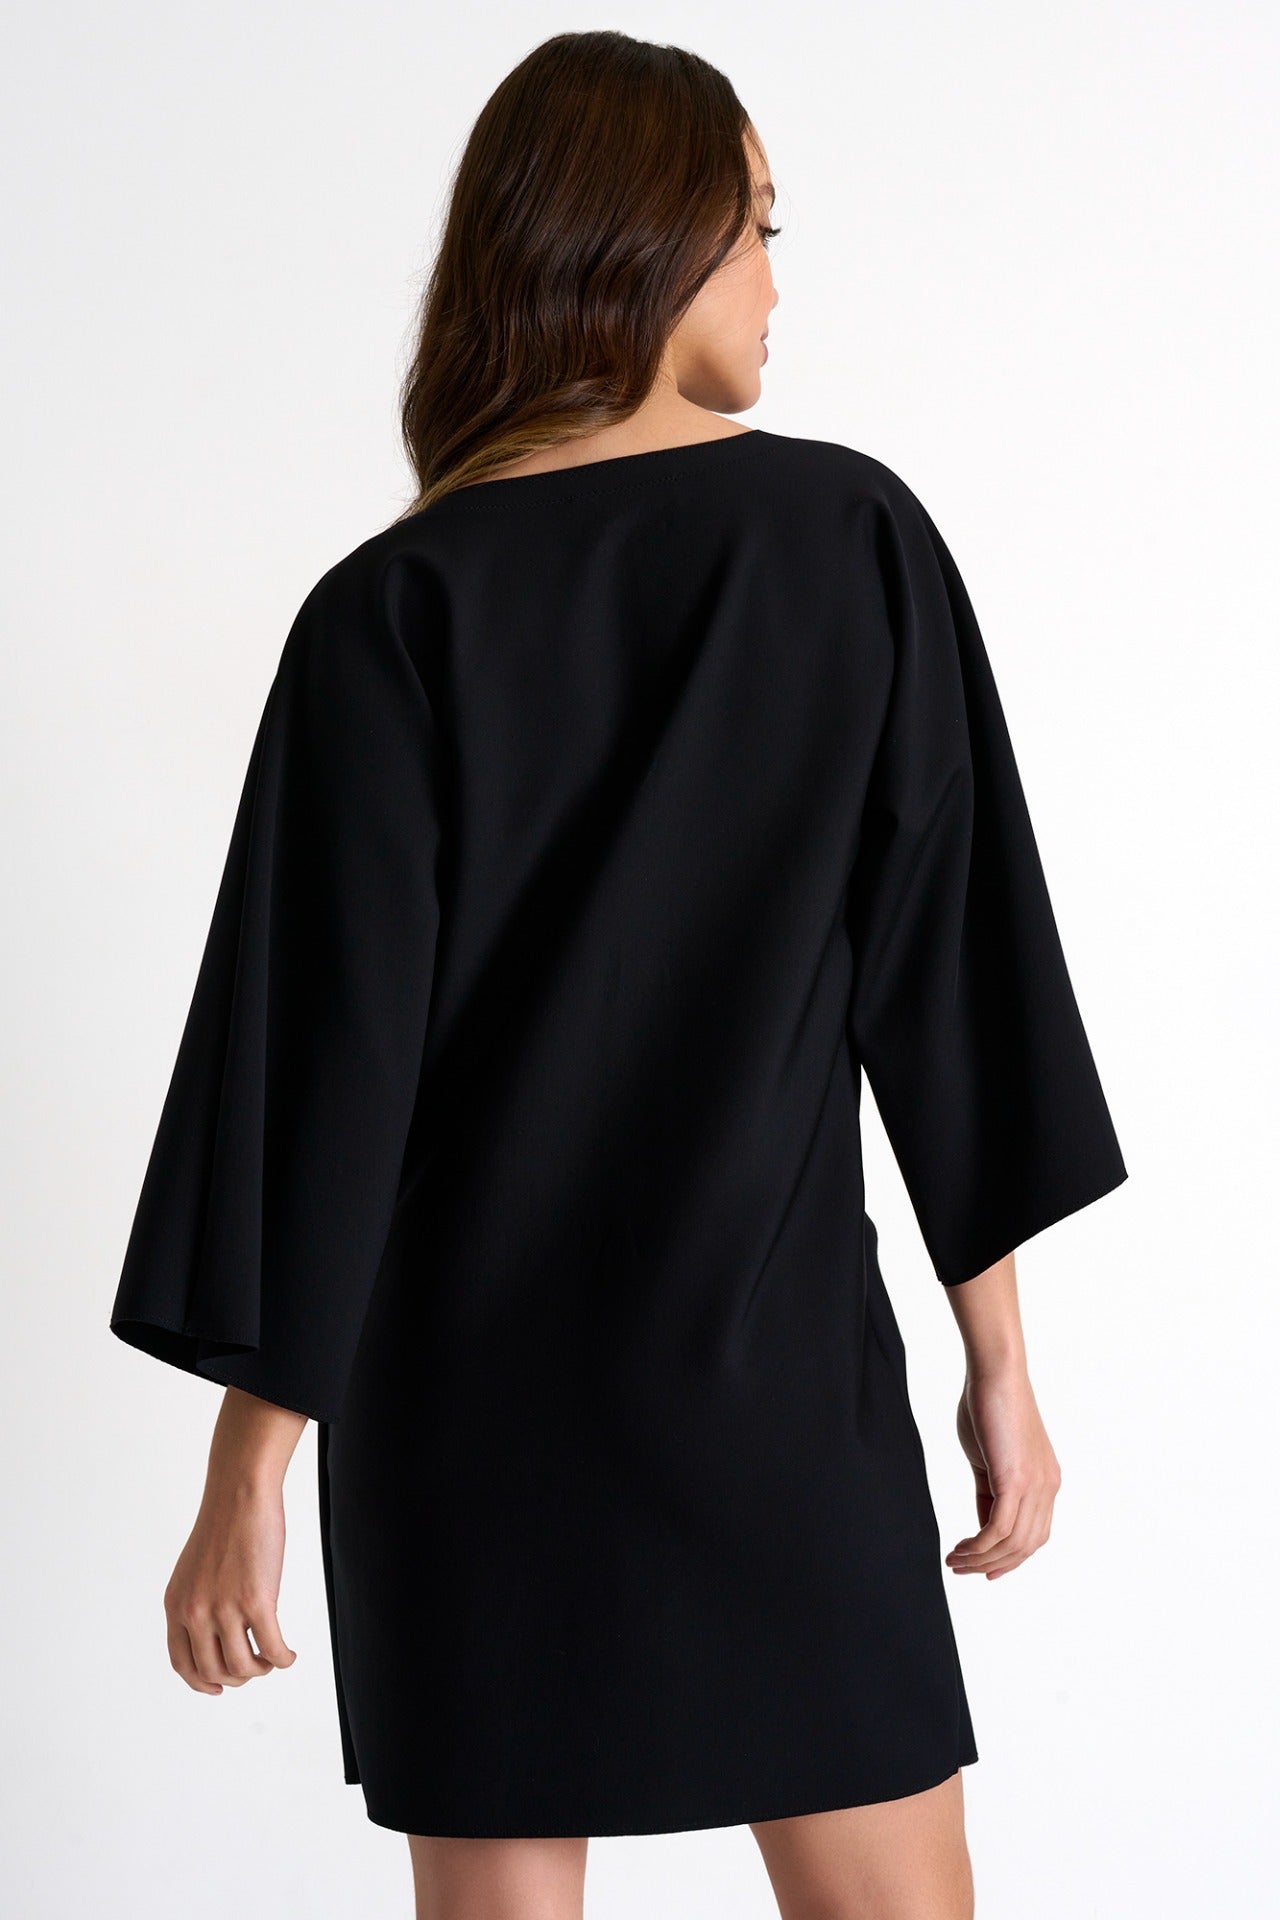 Shan Flared Sleeve Dress with cut-out details - My Filosophy